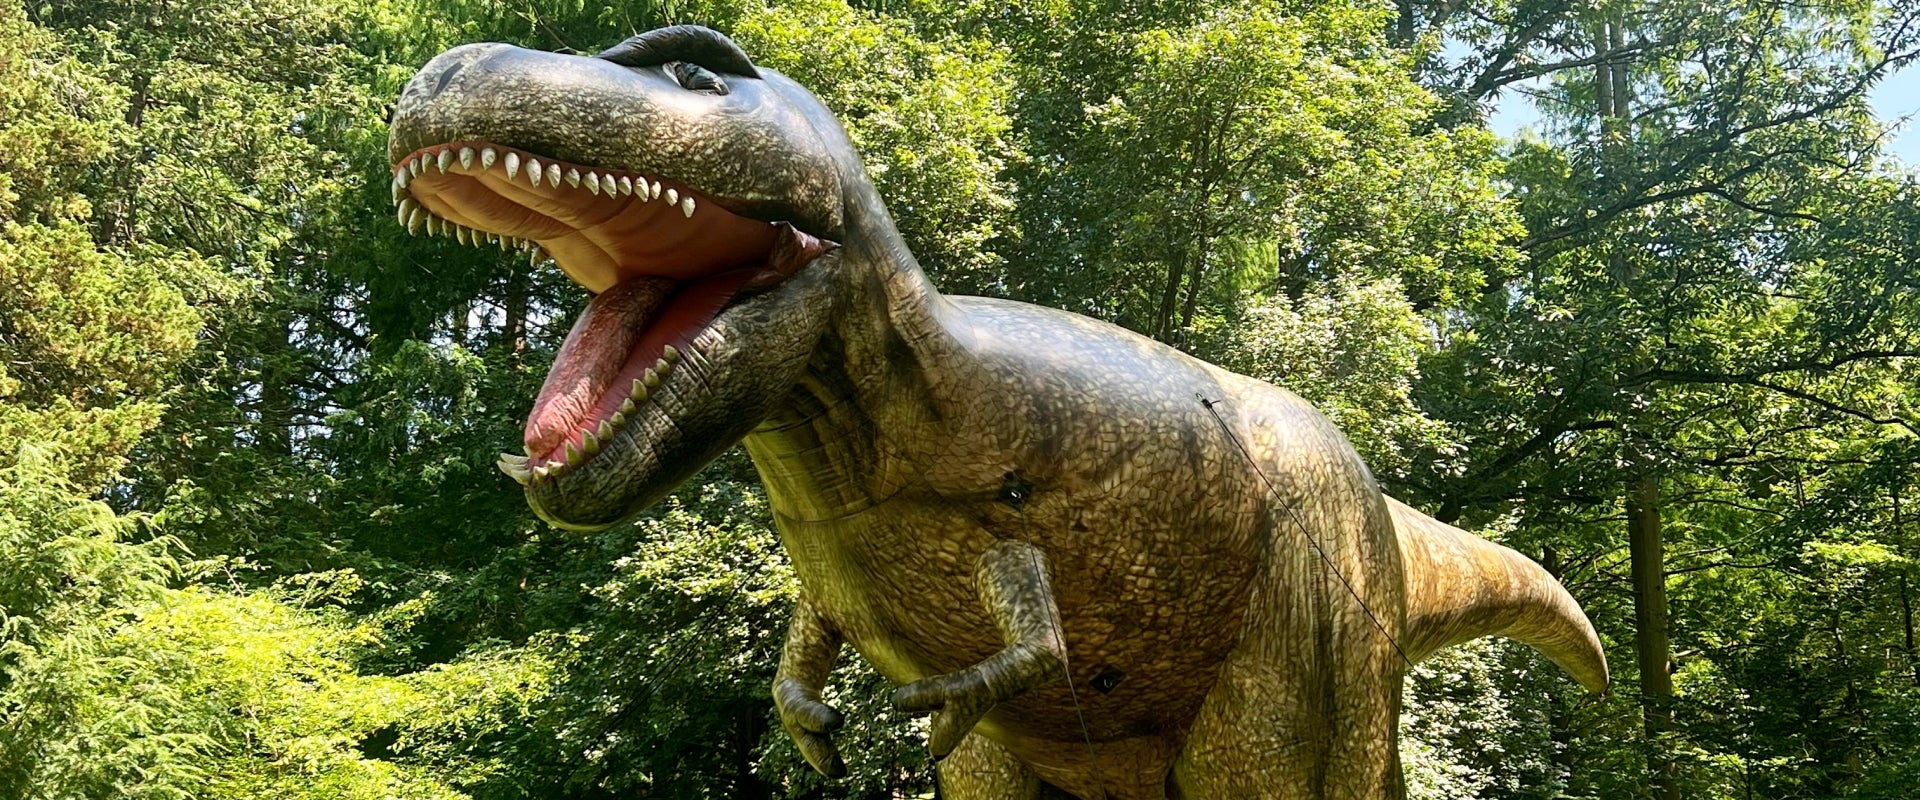 A 25-foot inflatable Tyrannosaurus rex outdoors surrounded by trees. 